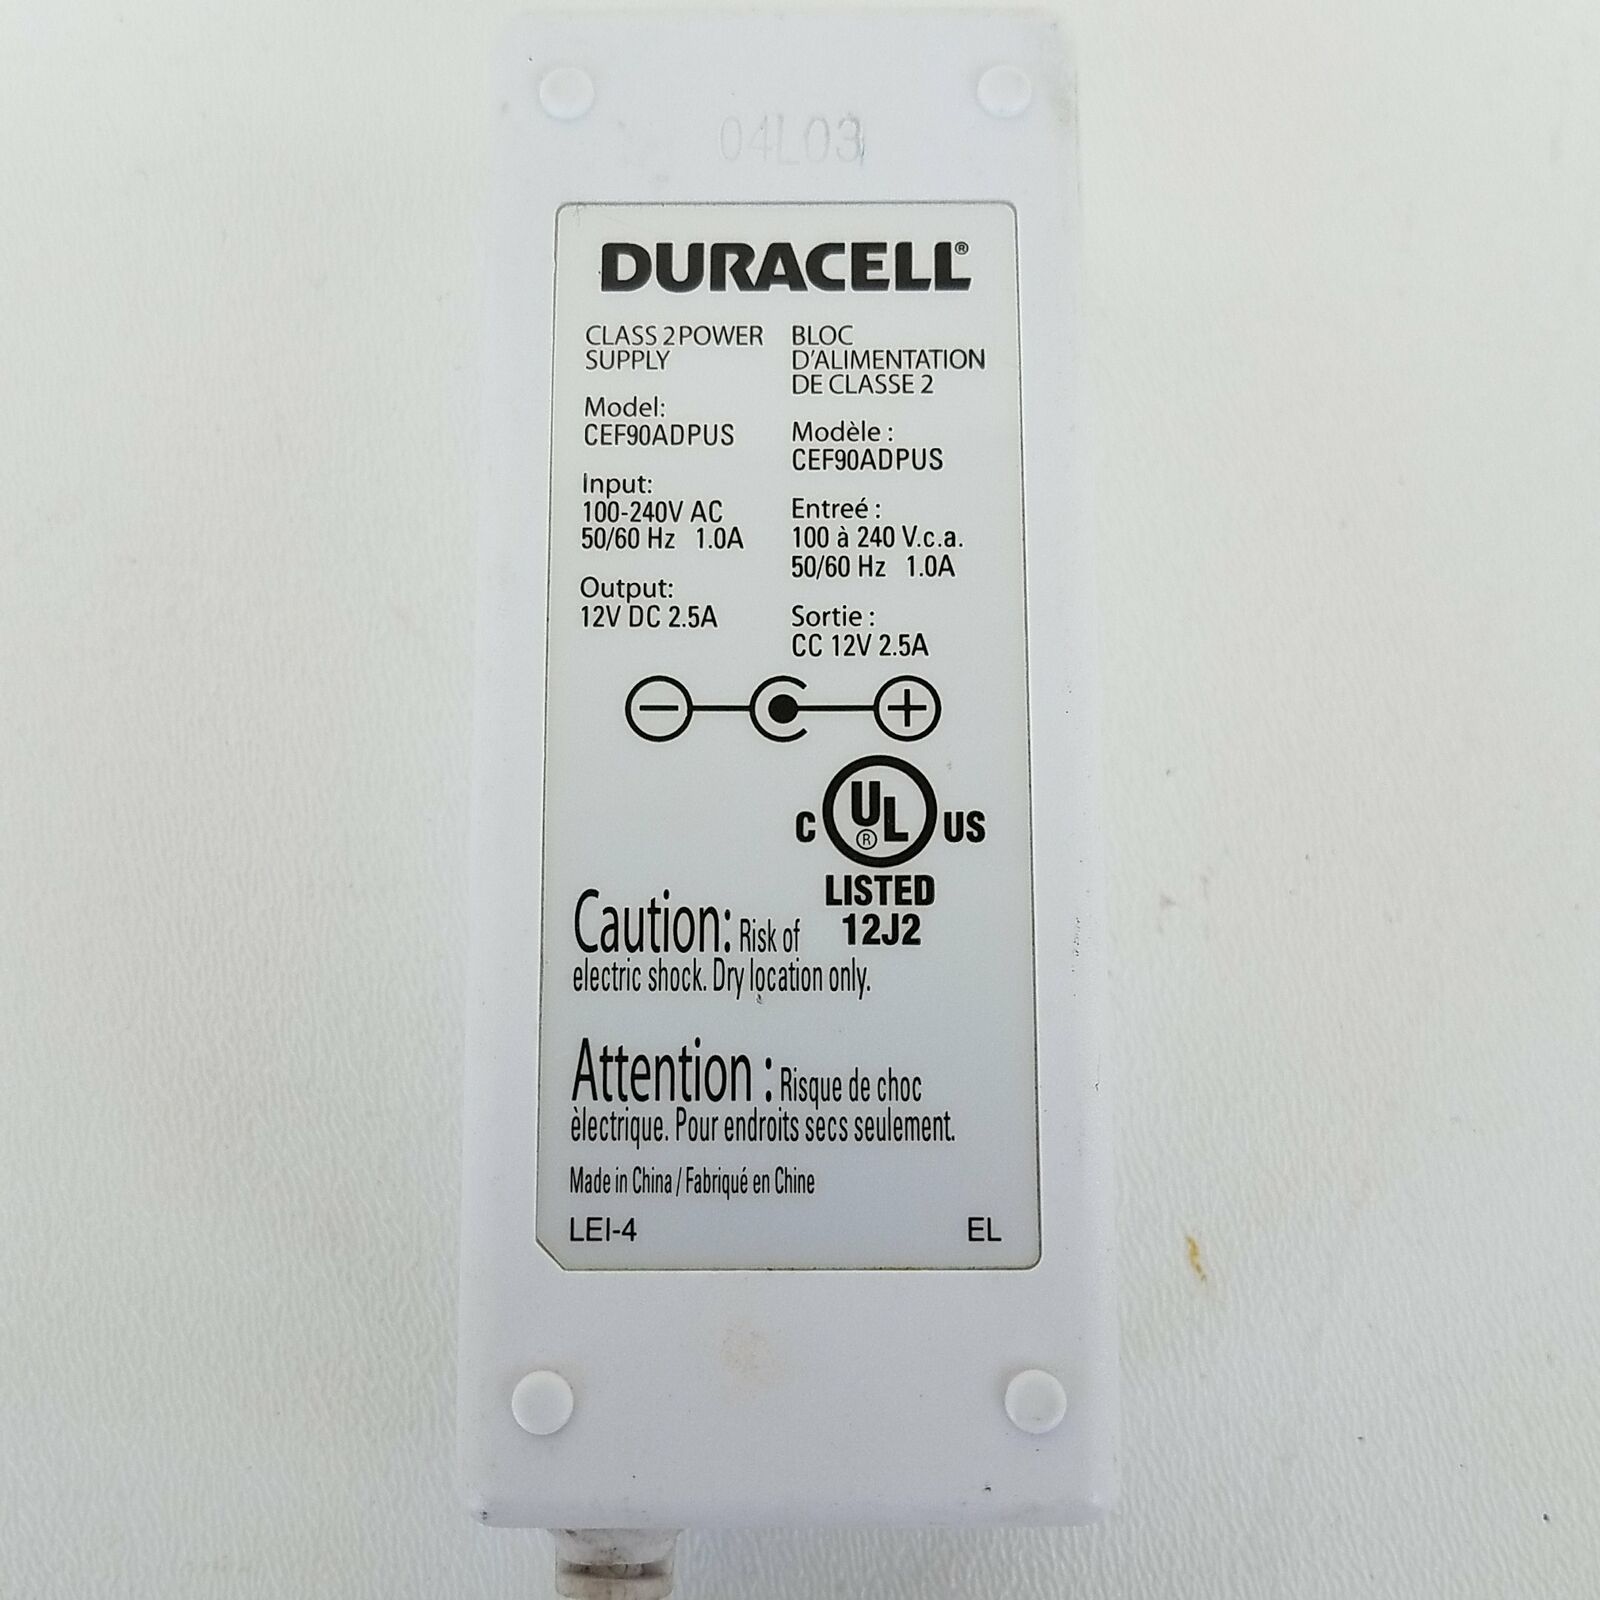 New Duracell CEF90ADPUS Class 2 Power Supply Adapter 12VDC 2.5A